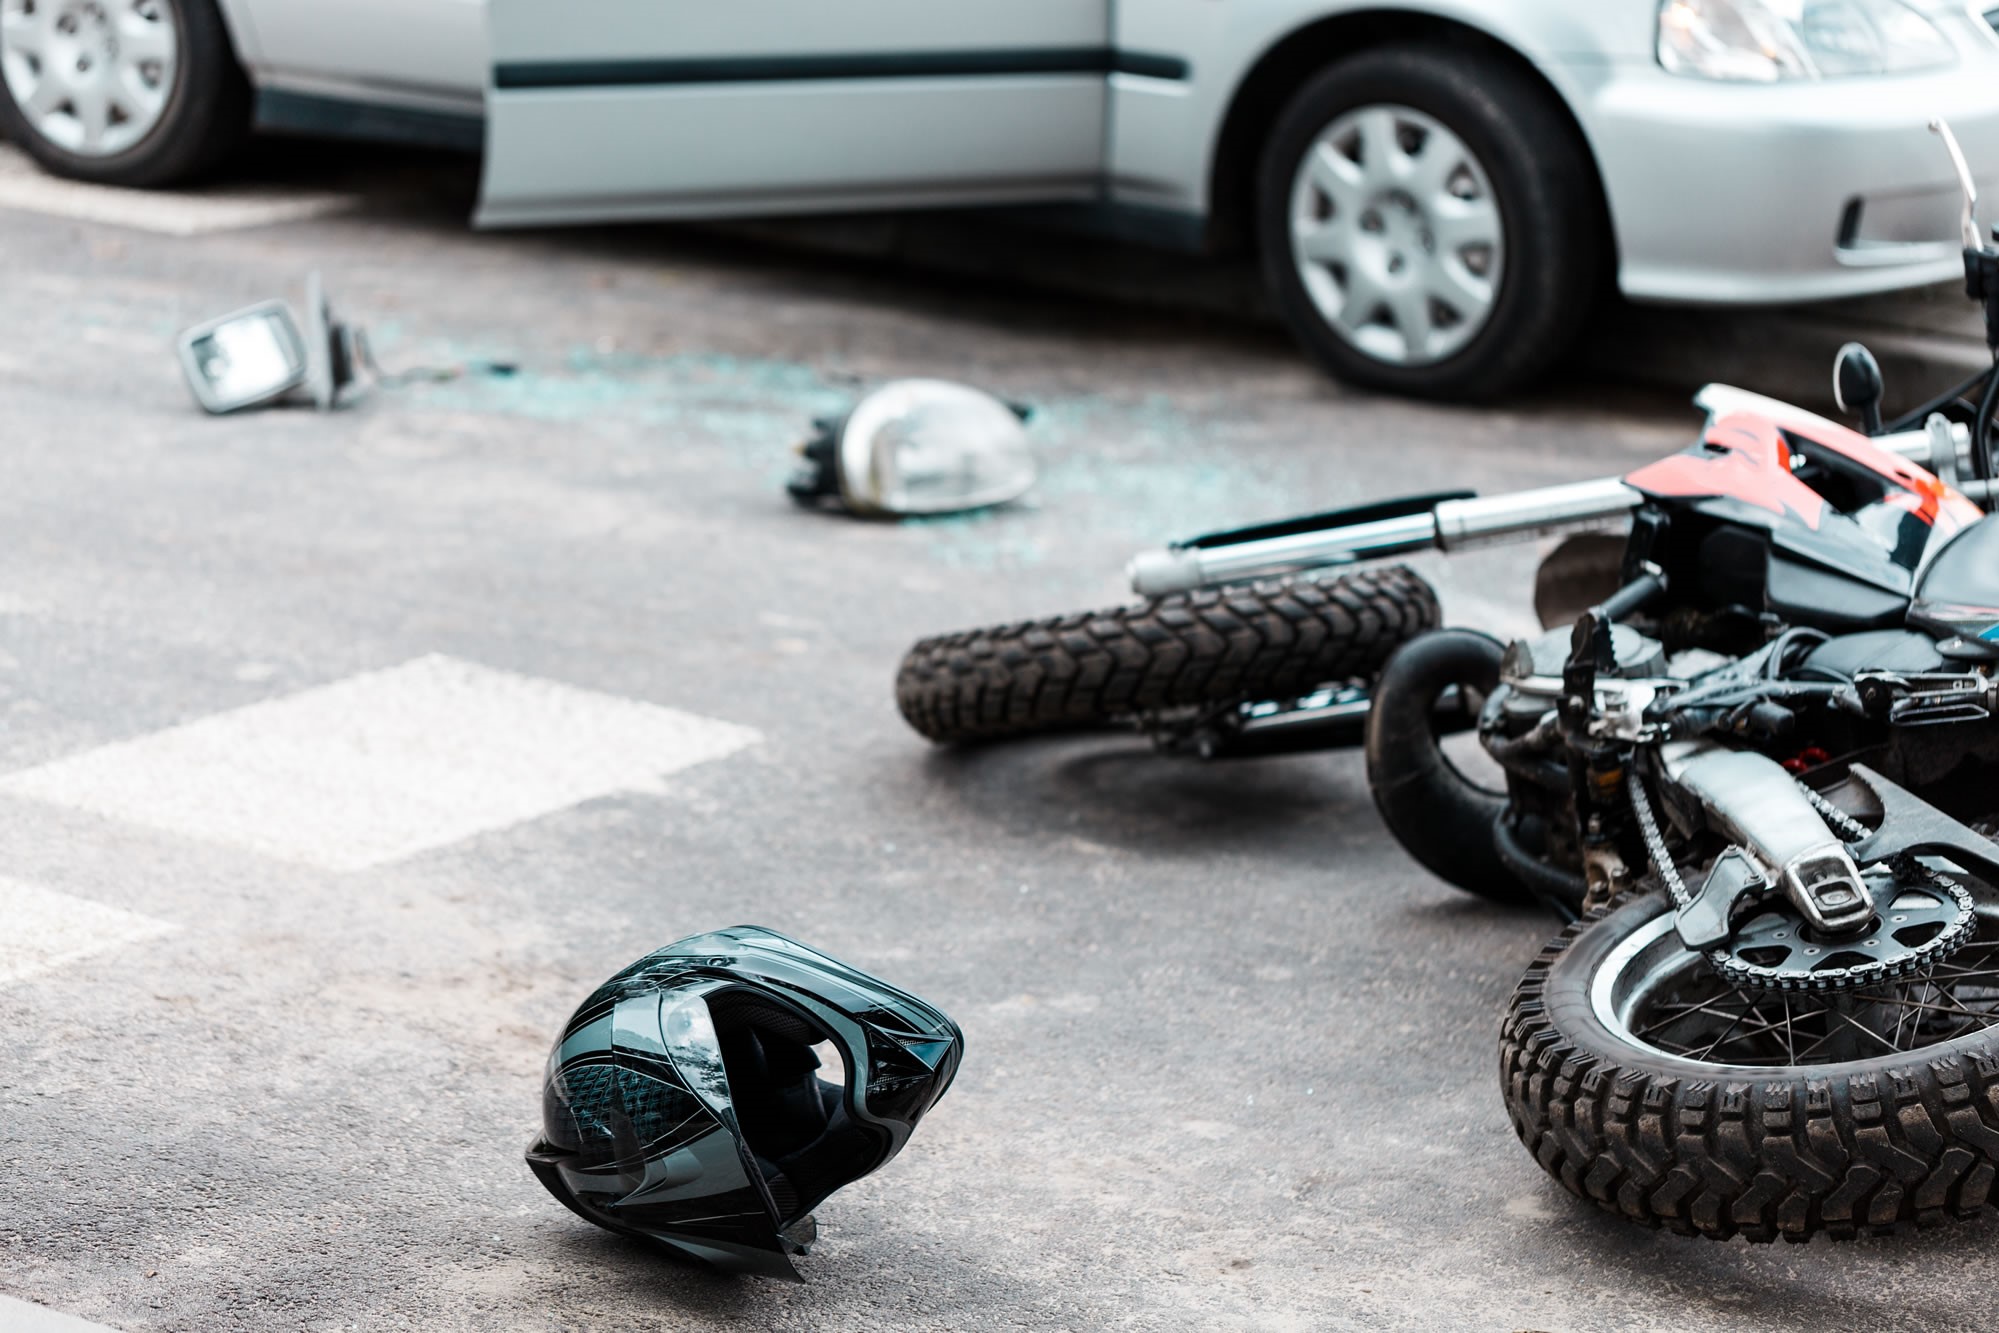 Motorbike, Motorcycle Accident, claims solicitors Stockport